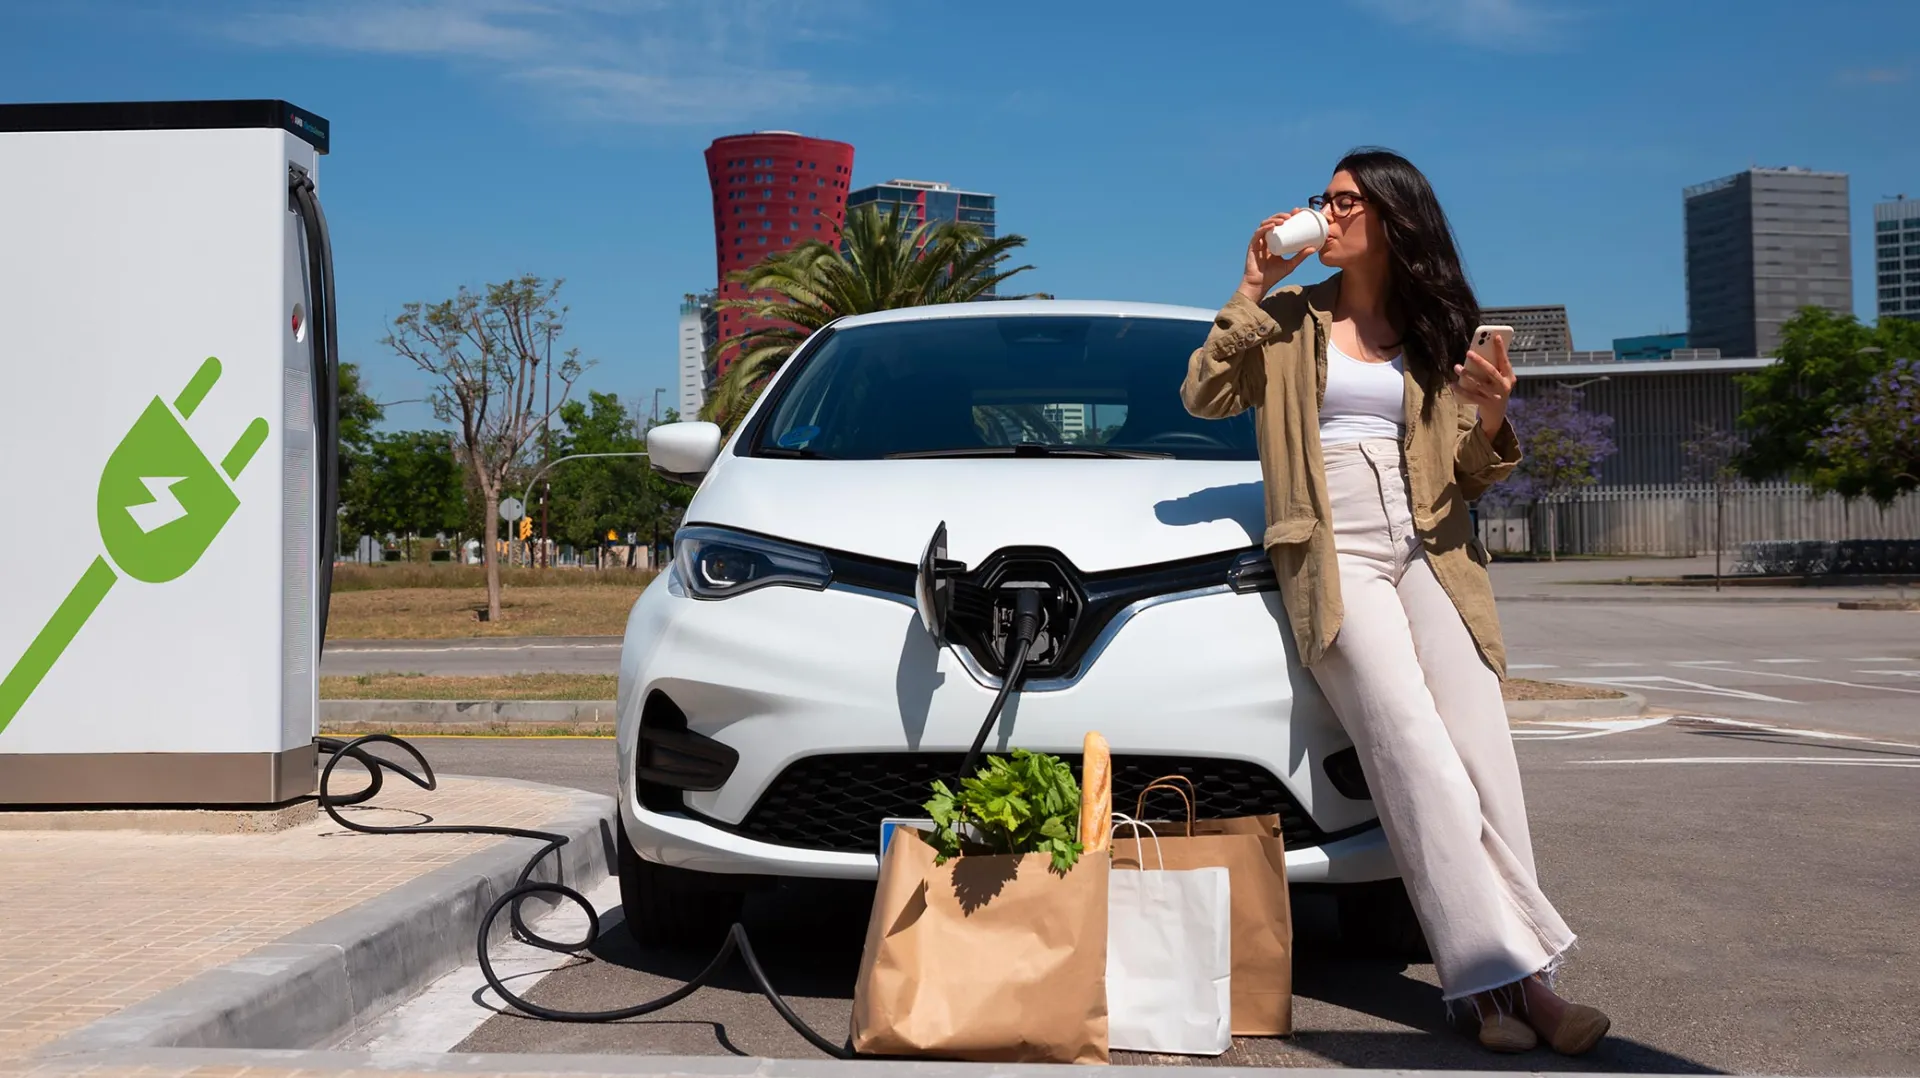 Electric car gas station lowest cost of ownership 